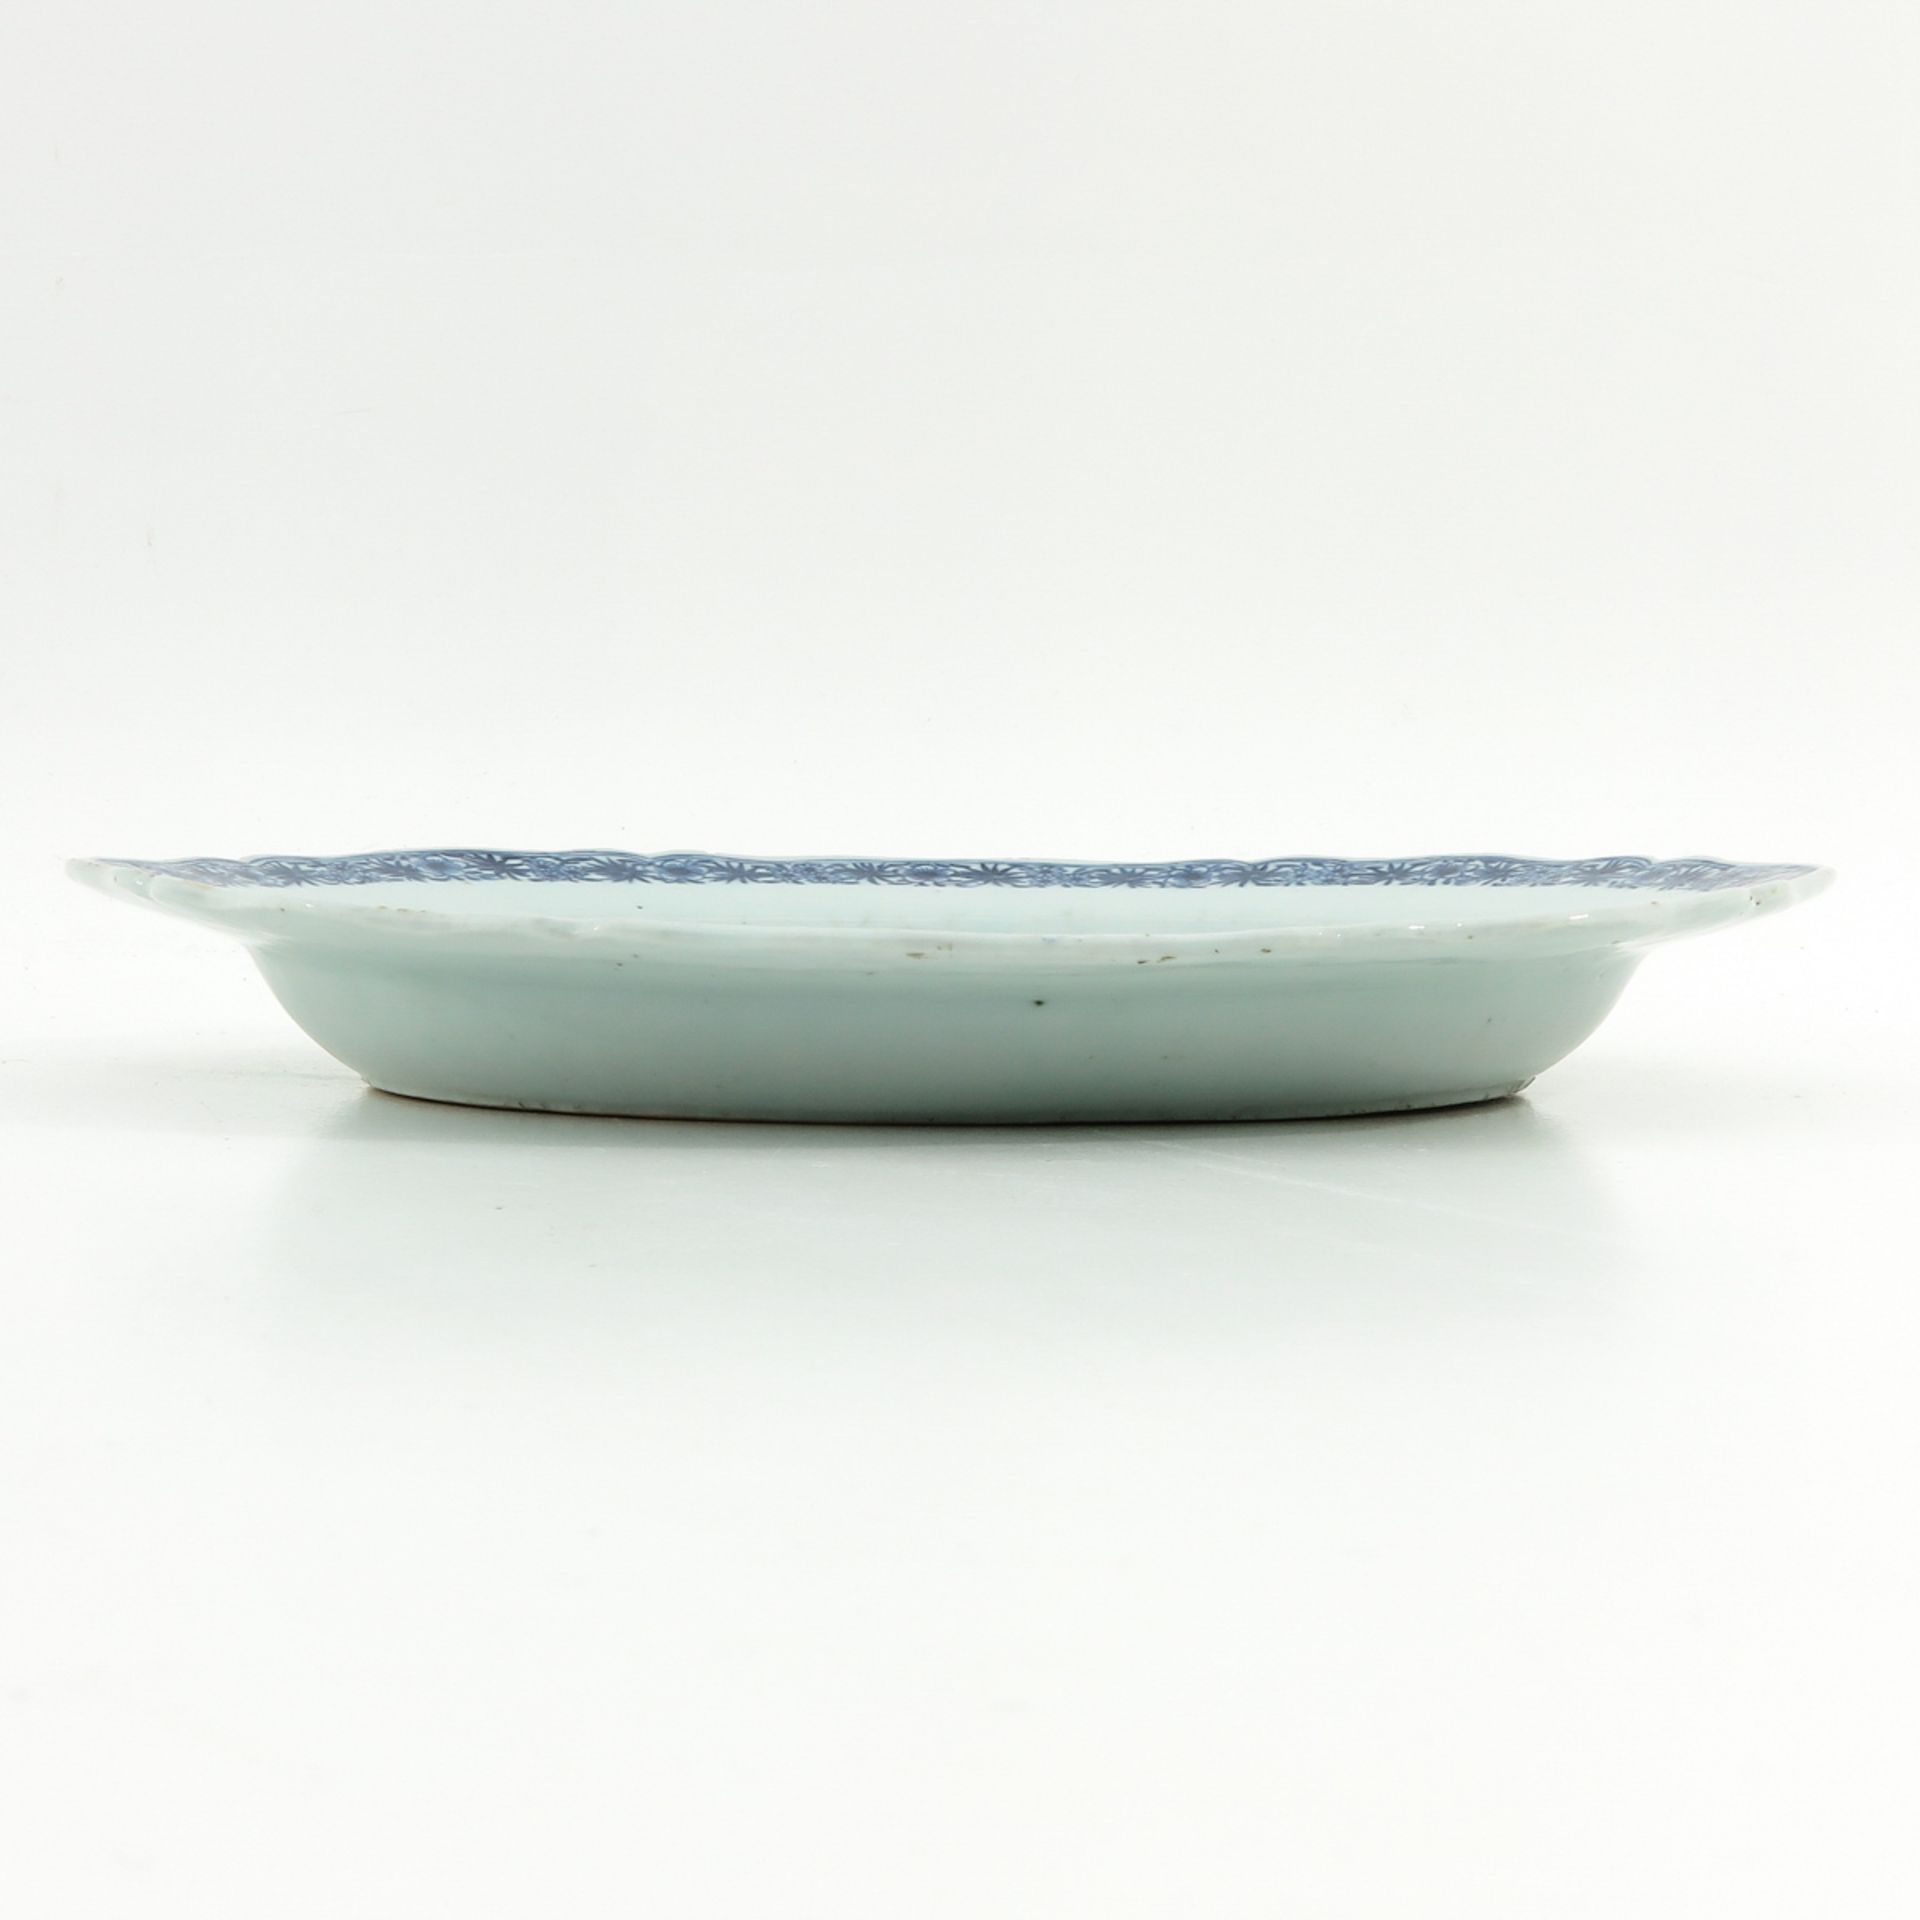 A Blue and White Serving Dish - Image 4 of 7